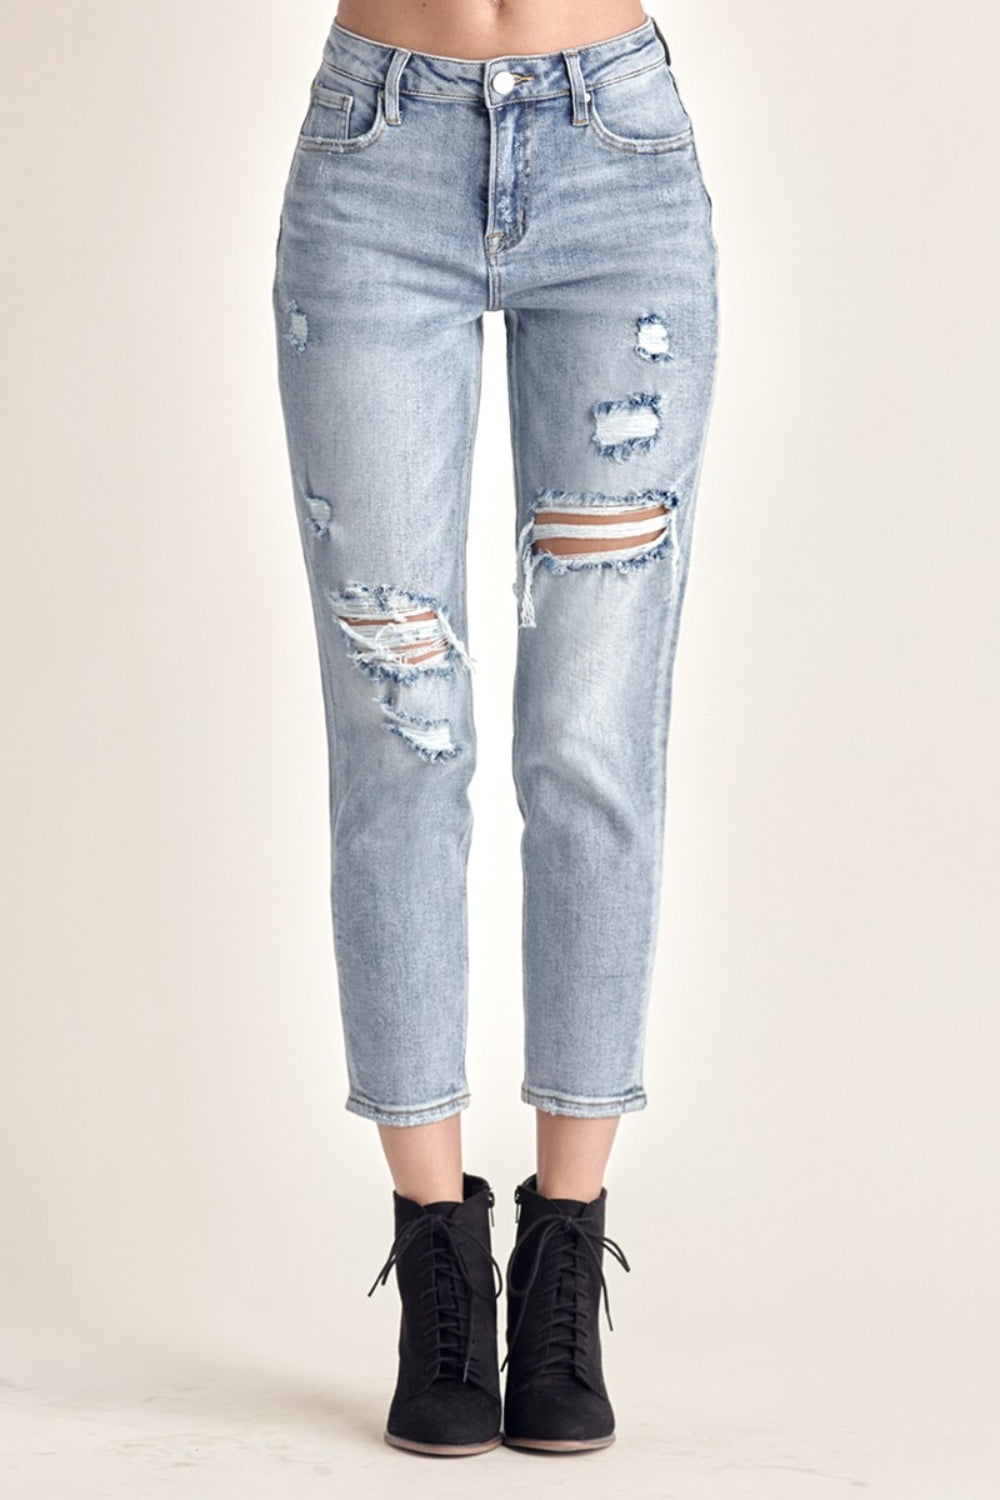 RISEN - Tapered Jeans - High Rise - Distressed - Inspired Eye Boutique